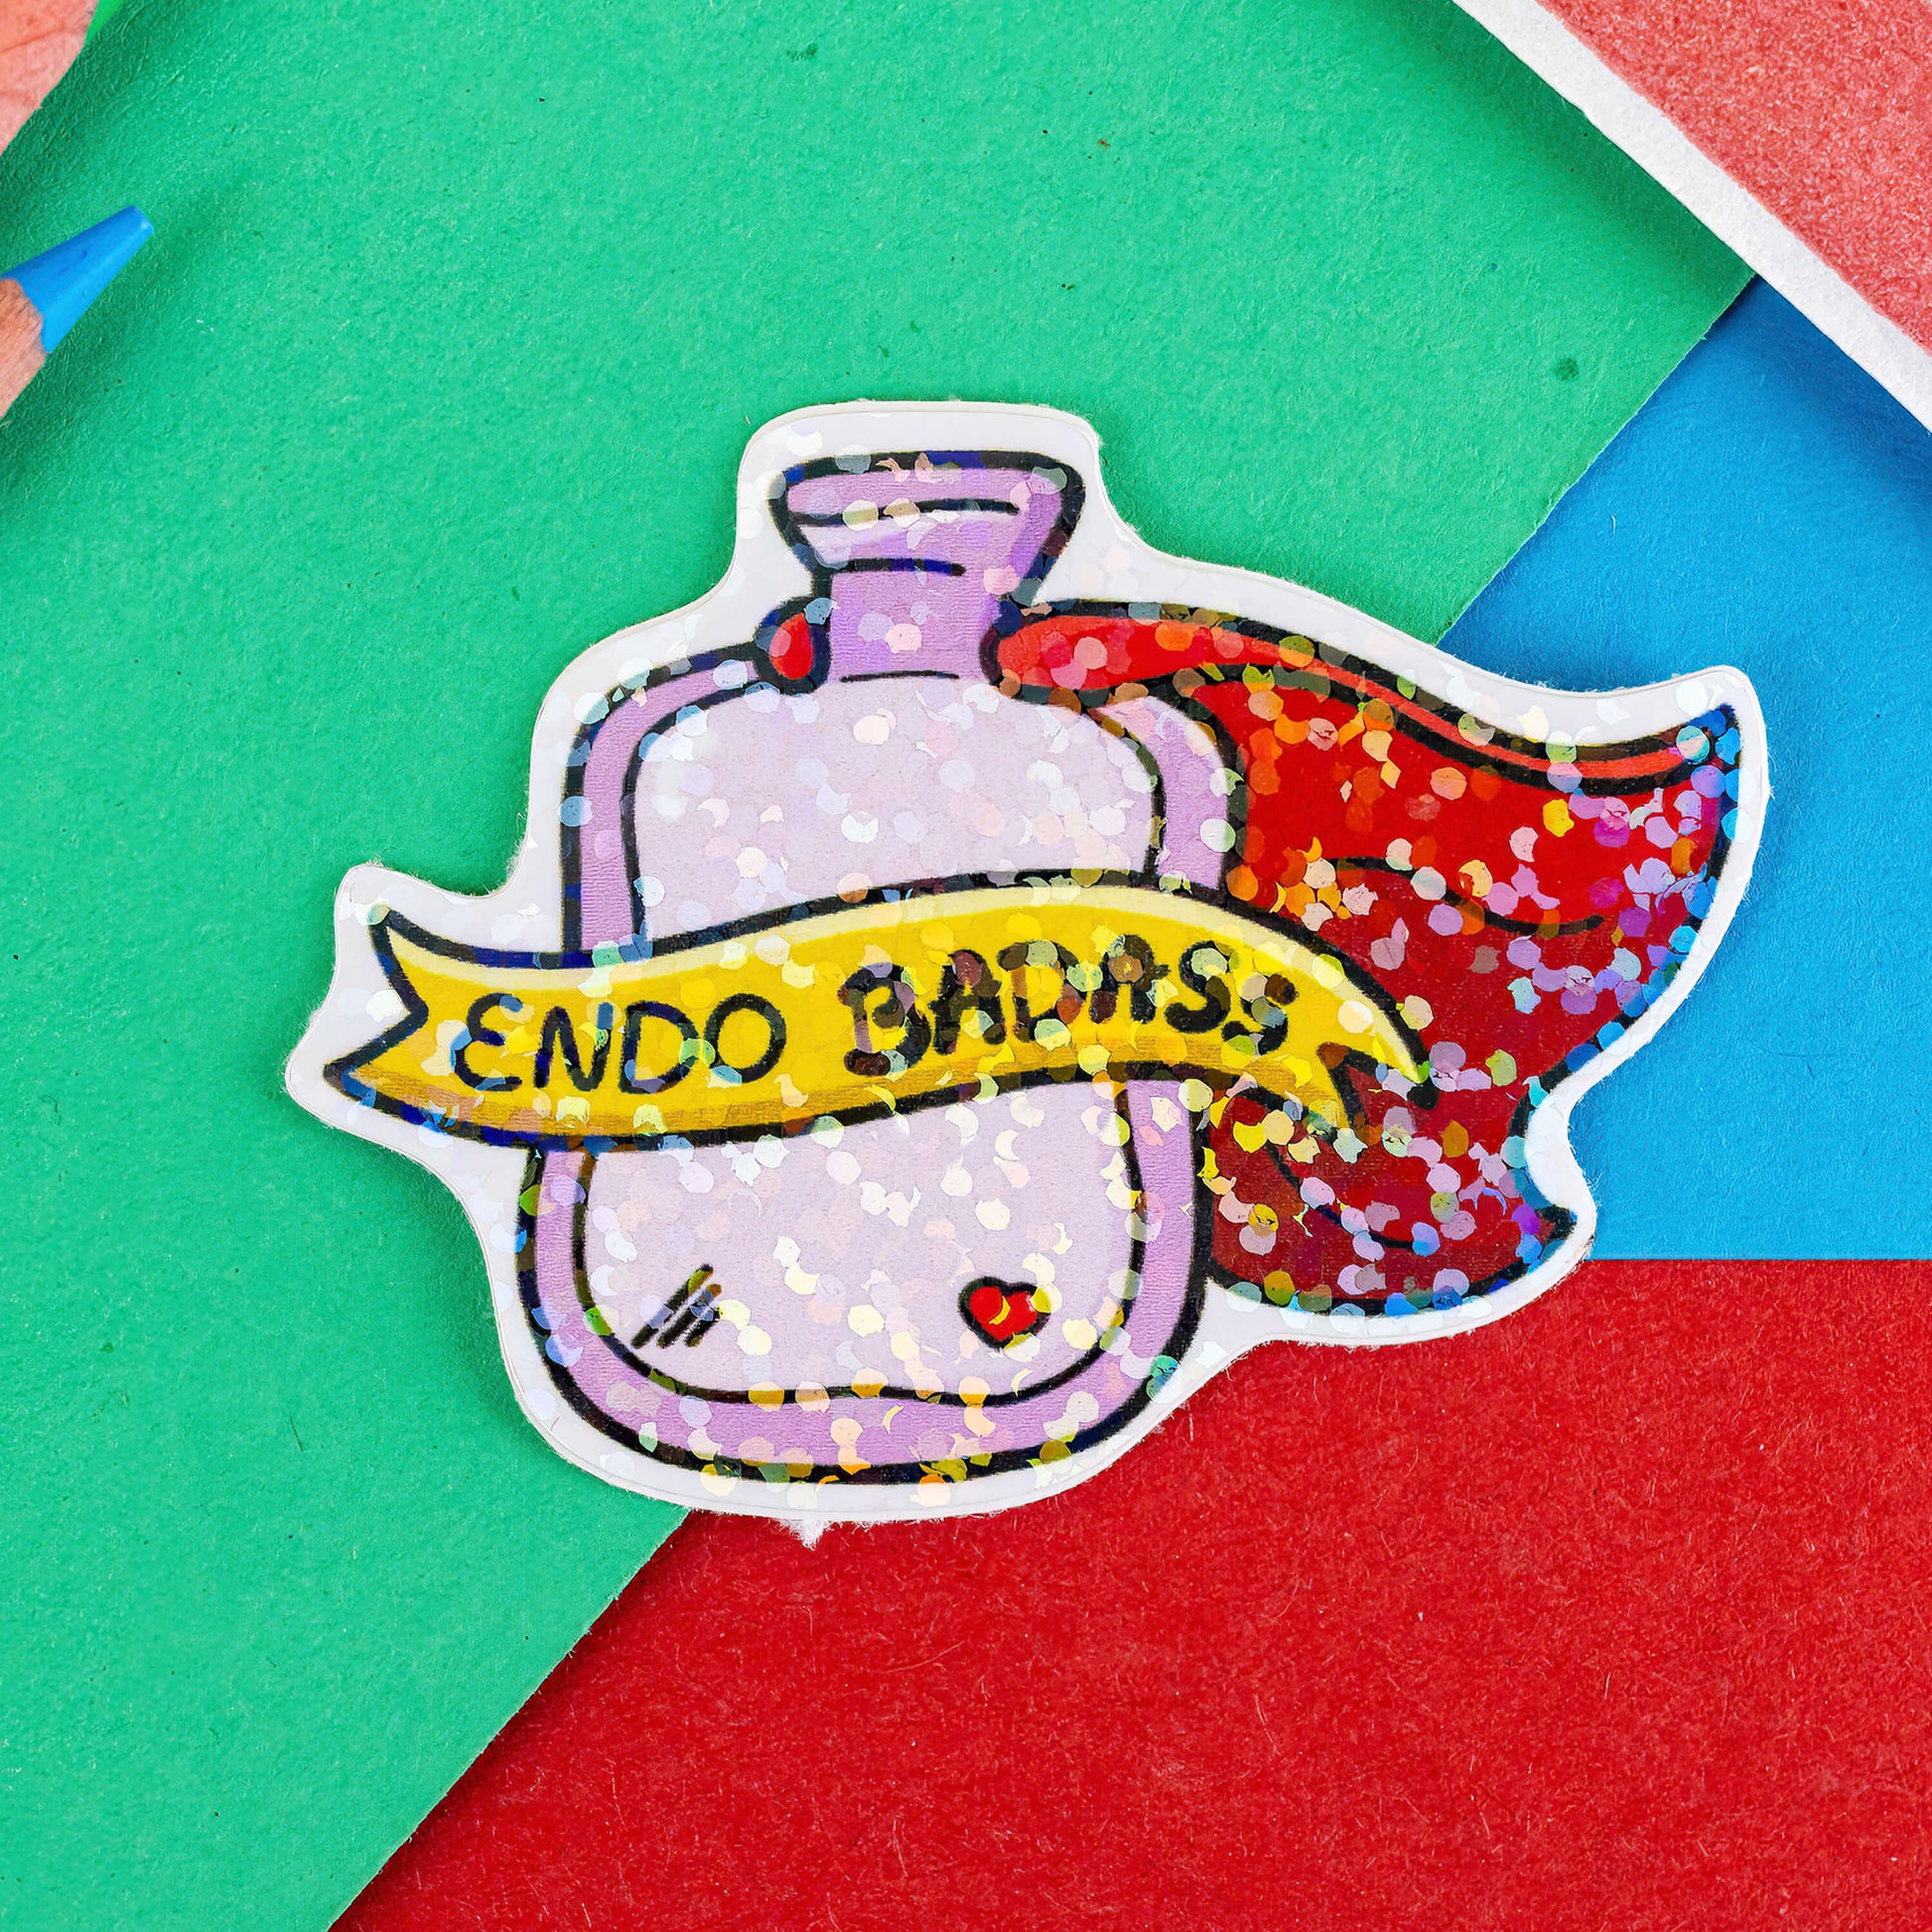 The Endo Badass Sticker - Endometriosis on a red, blue and green background with colouring pencils and red stripe candy bag. The holographic shiny sticker is of a pink hot waterbottle with a red small heart, a red cape and yellow banner going across with black text reading 'Endo Badass'. Hand drawn design is raising awareness for endometriosis and pelvic pain.